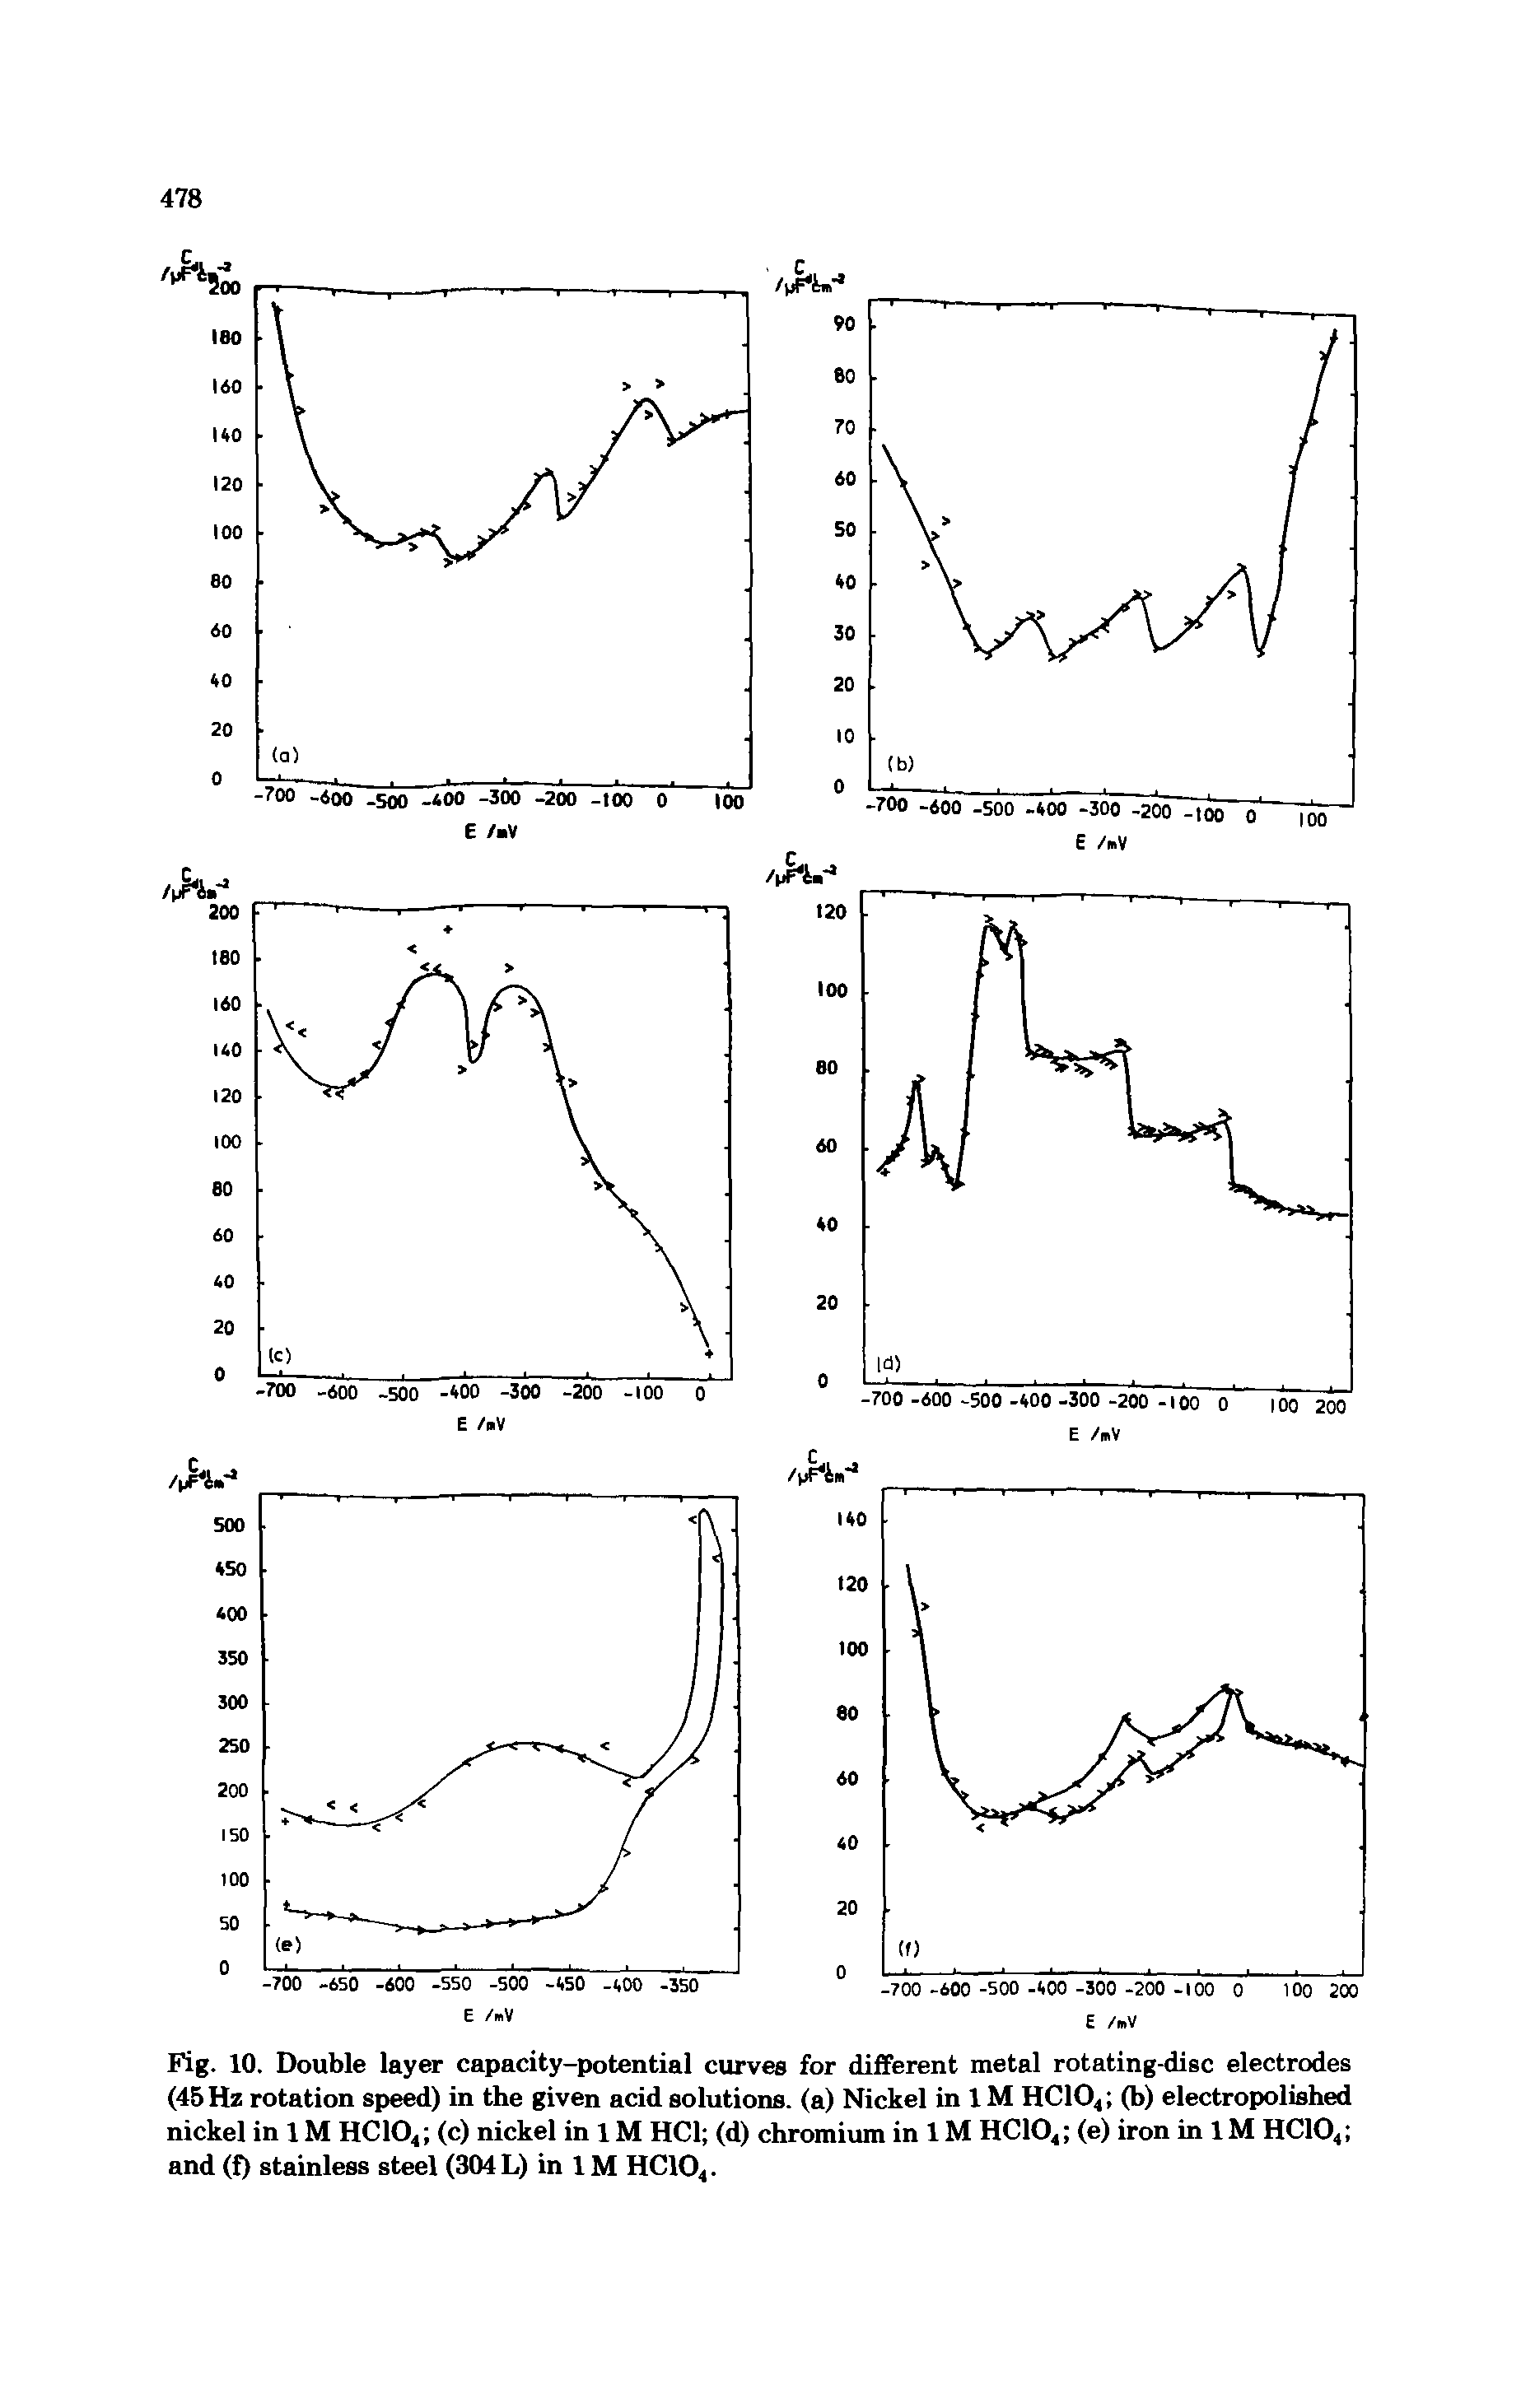 Fig. 10. Double layer capacity-potential curves for different metal rotating-disc electrodes (45 Hz rotation speed) in the given acid solutions, (a) Nickel in 1M HC104 (b) electropolished nickel in 1M HC104 (c) nickel in lM HC1 (d) chromium in 1M HC104 (e) iron in 1M HC104 and (f) stainless steel (304 L) in 1M HC104.